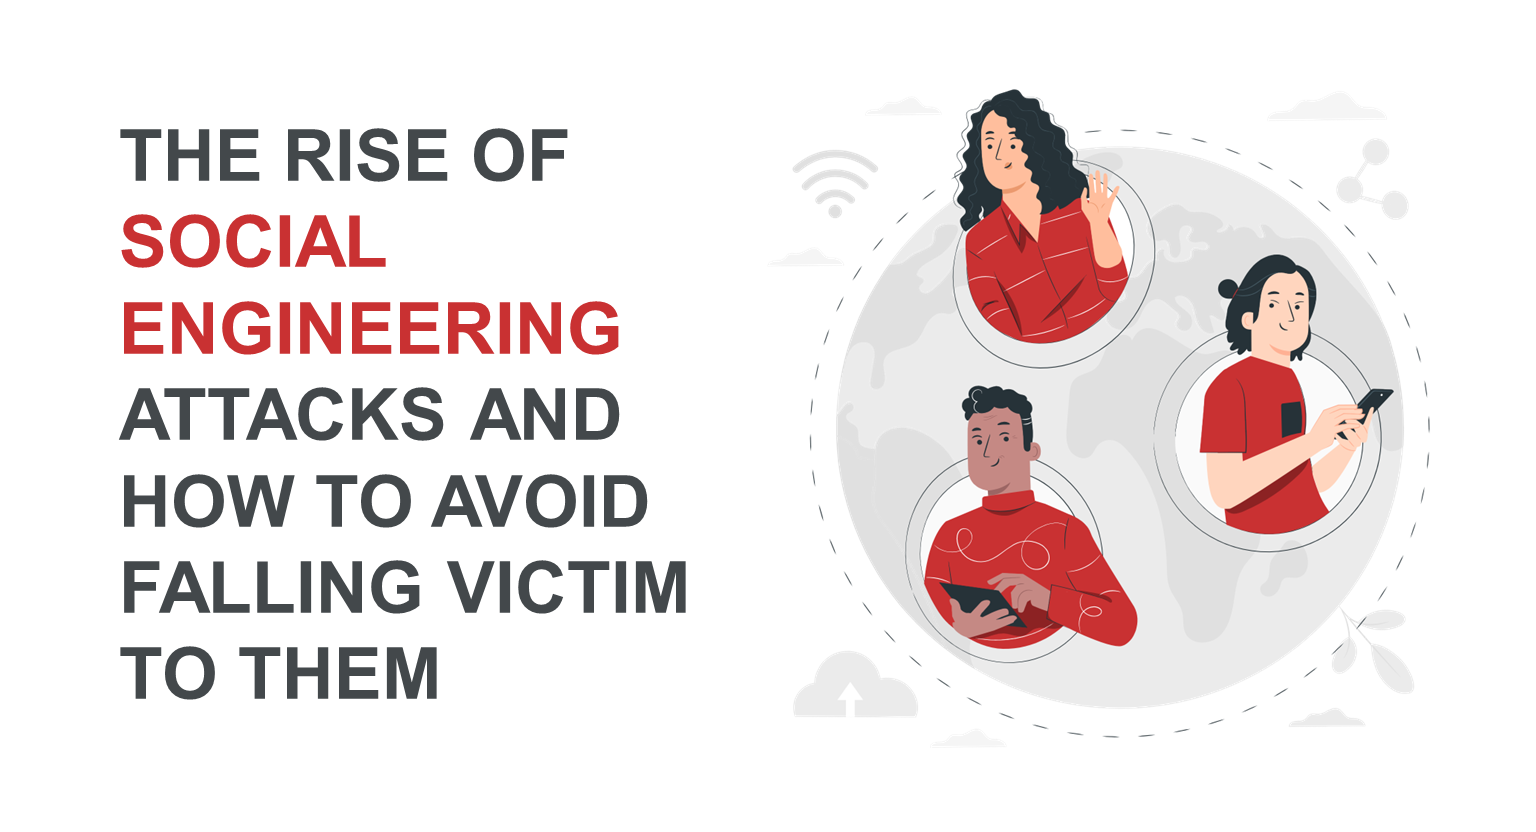 The rise of social engineering attacks and how to avoid falling victim to them